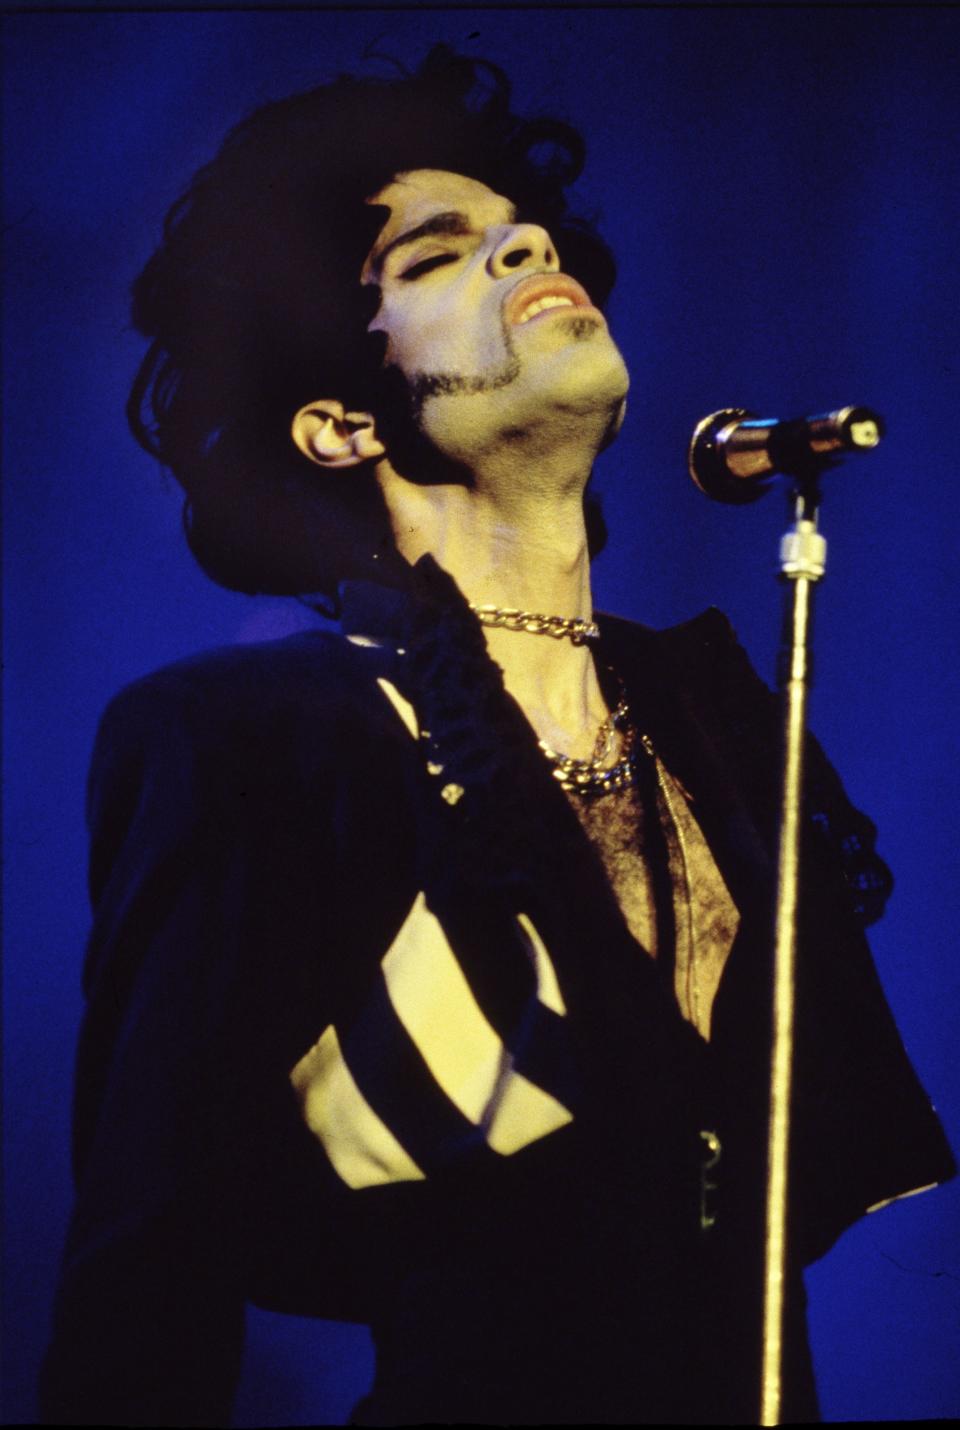 American singer-songwriter Prince performs on stage, London, 1993. (Photo by Michael Putland/Getty Images) 